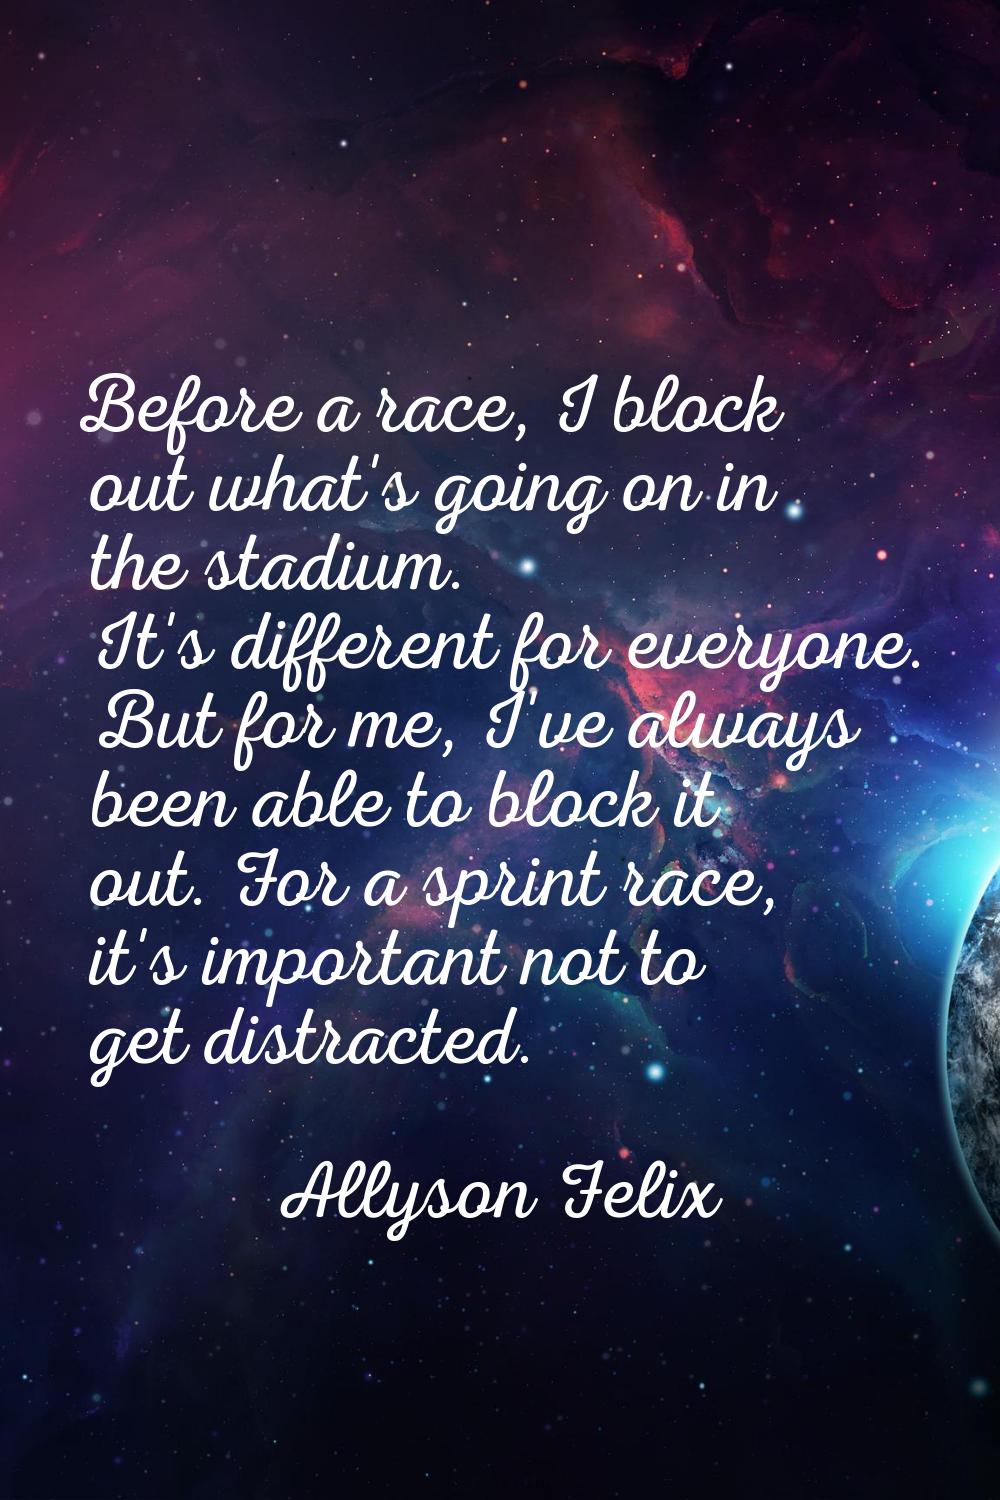 Before a race, I block out what's going on in the stadium. It's different for everyone. But for me,